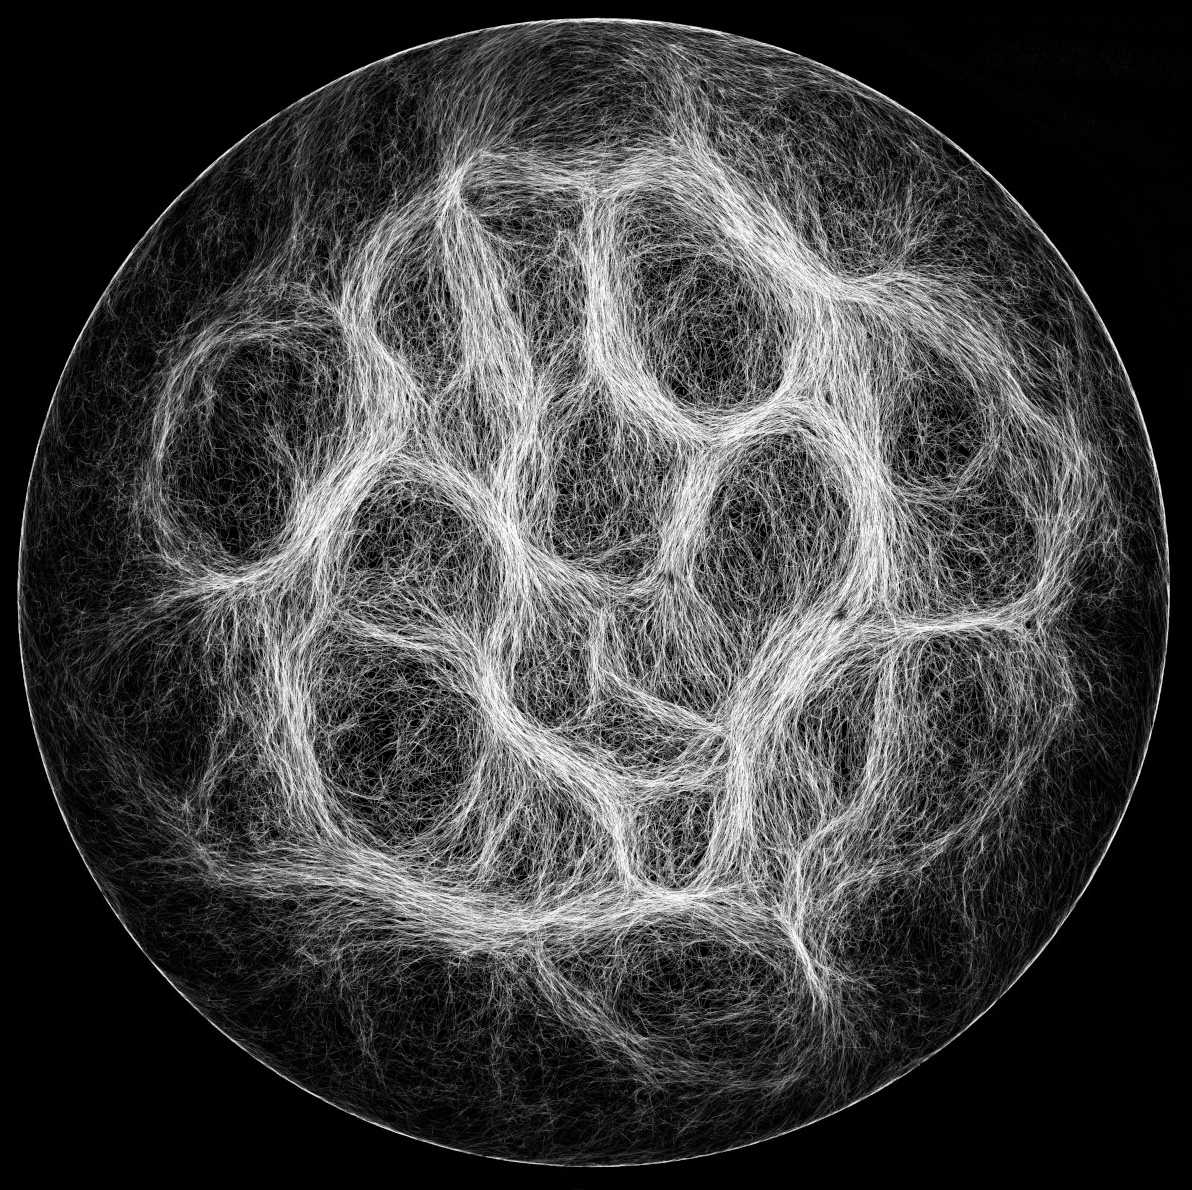 &lt;strong&gt;Figure 1.&lt;/strong&gt; A fluorescent microscopic image of cyanobacteria that form a distinct web-like pattern, where individual bacterial fibers align with each other rather than randomly distribute. Figure courtesy of [1].